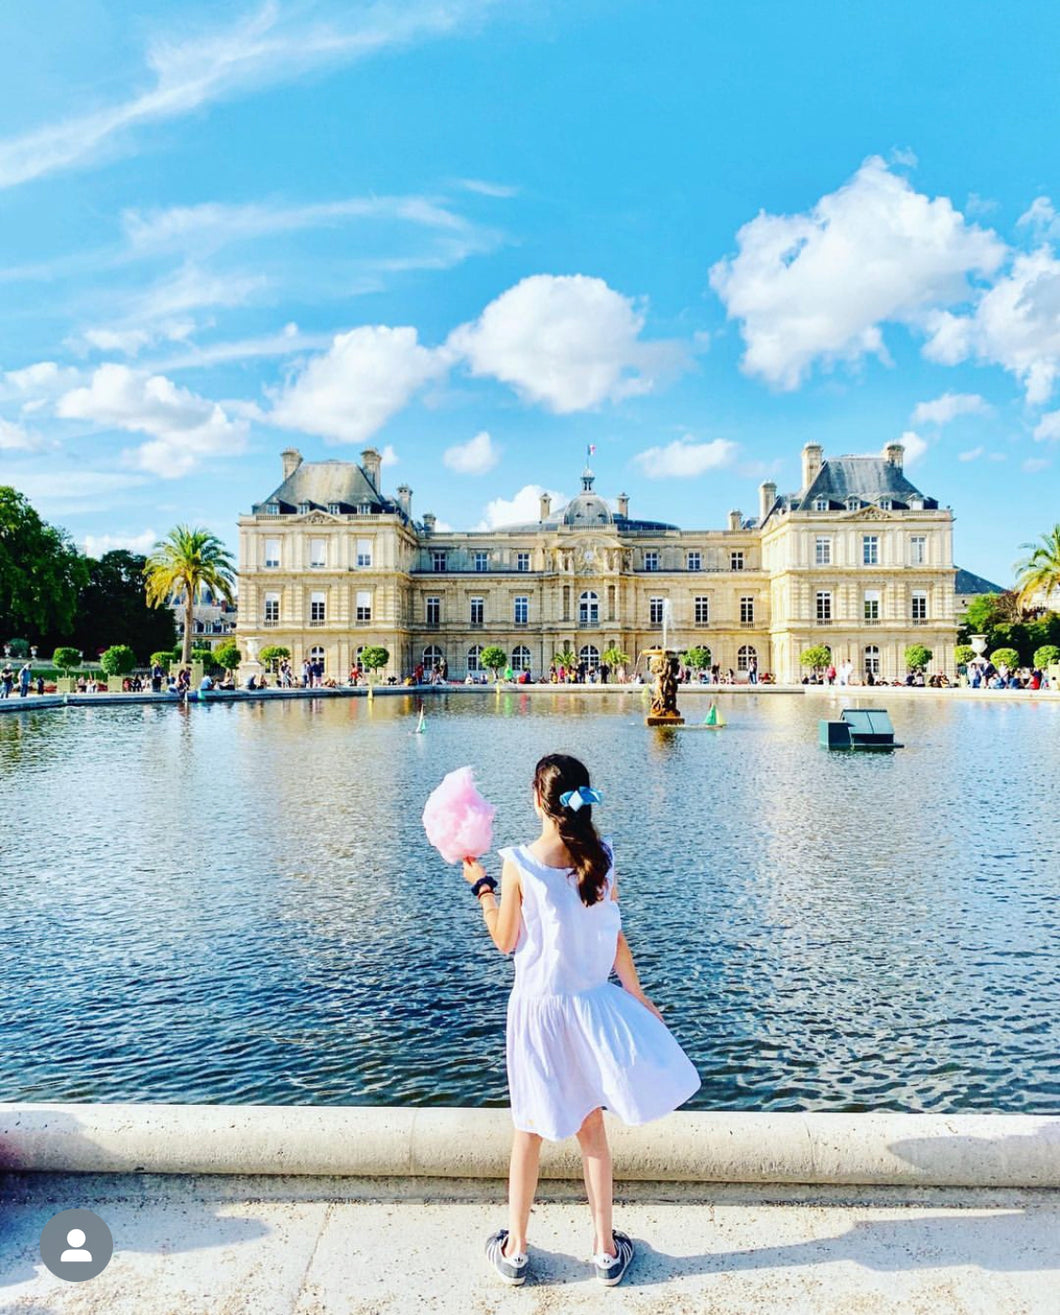 Emily's guide to the 6th arrondissement of Paris